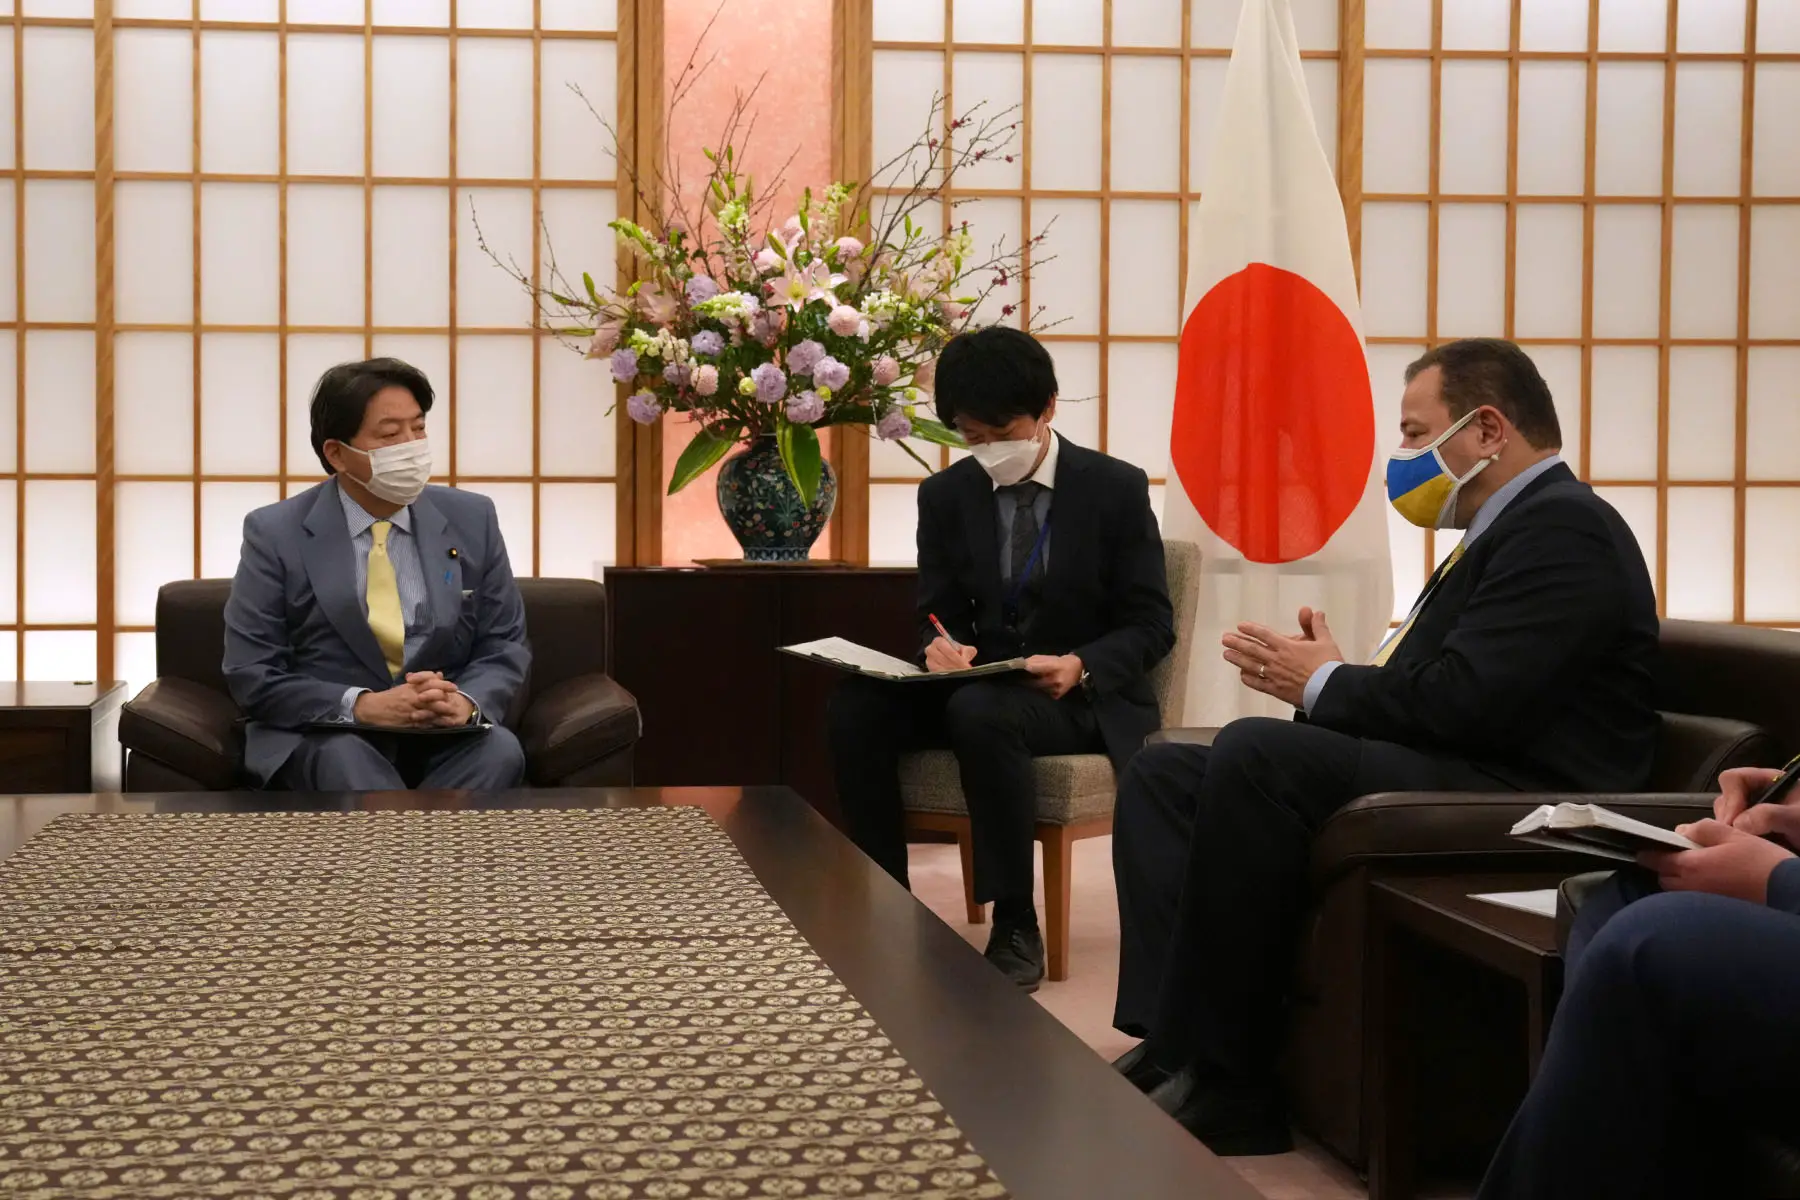 Japan's Foreign Minister, Yoshimasa Hayashi, speaks with the Ukrainian ambassador to Japan, Sergiy Korsunsky, following the Russian invasion of Ukraine in 2022. A young person sitting in between them is taking notes.